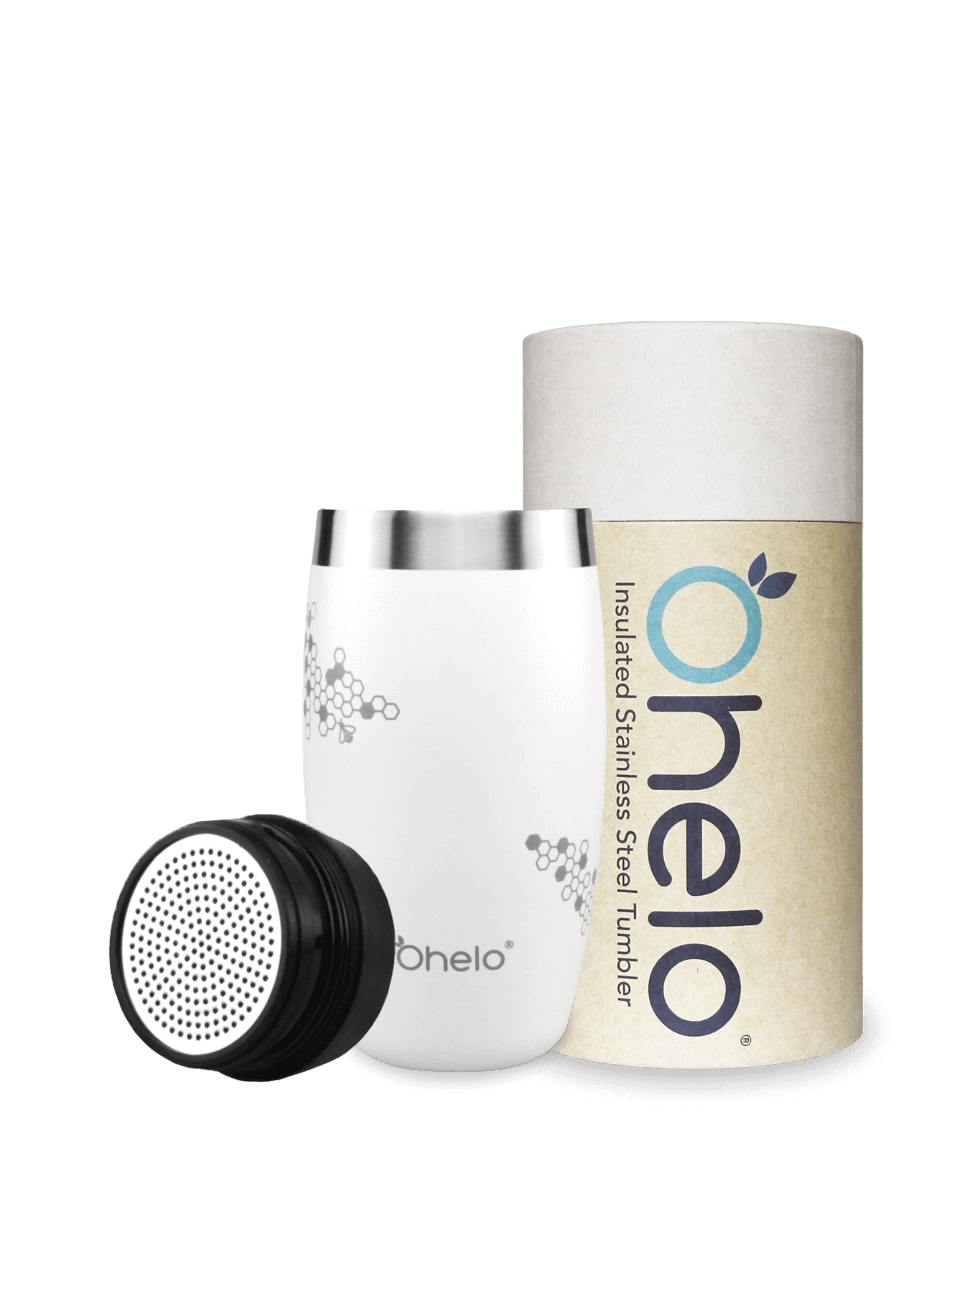 Ohelo BPA free insulated tumbler in white with bee design with recycled packaging